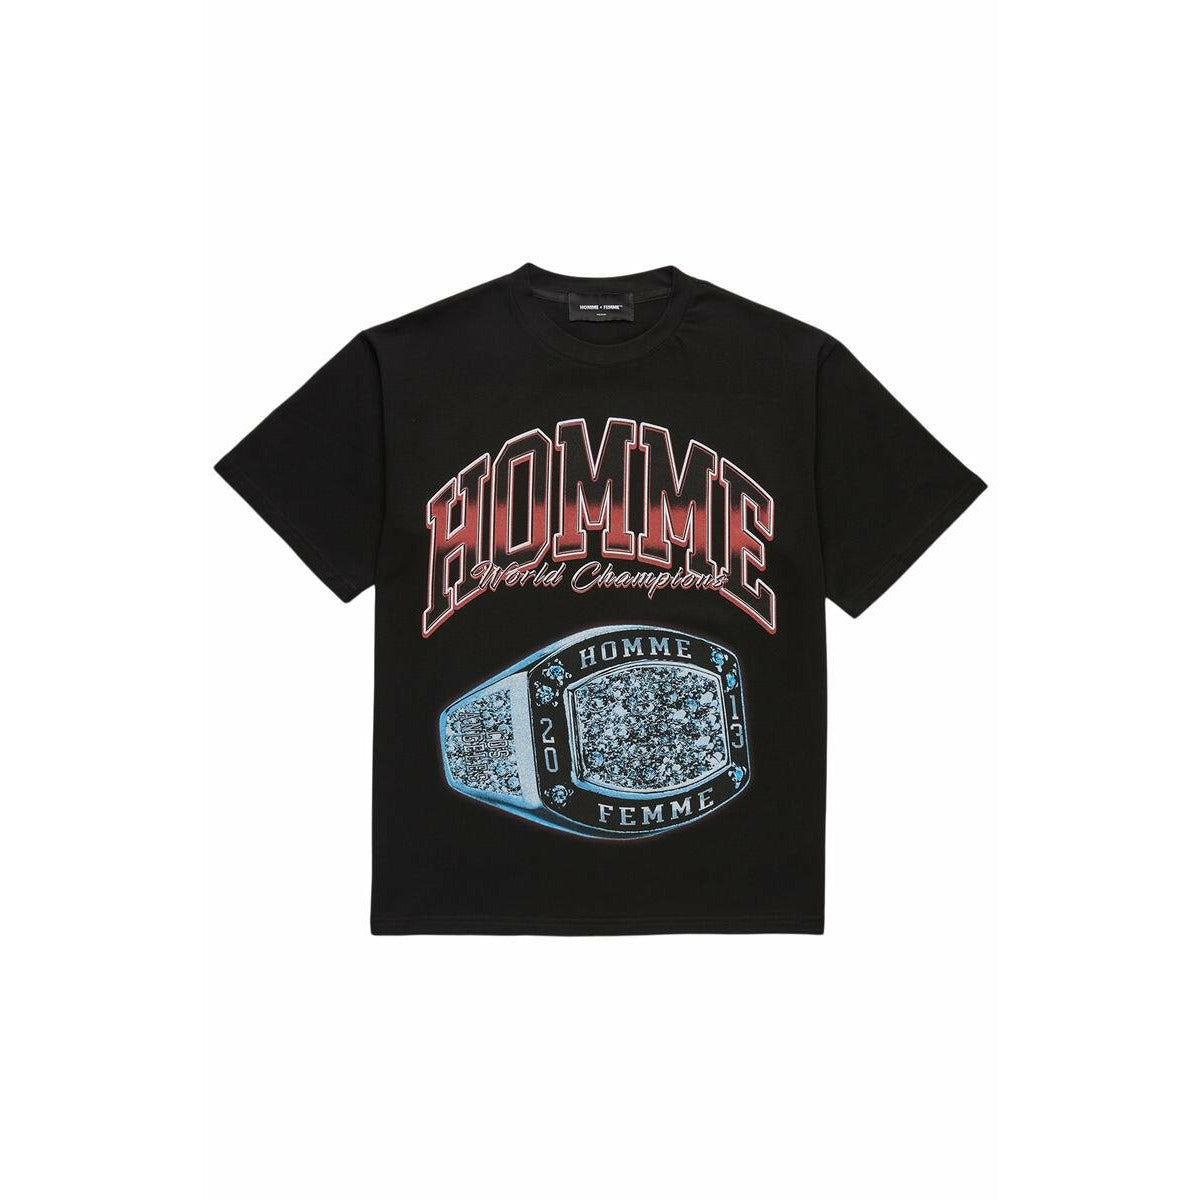 Homme + Femme Black/Red World Champs Tee